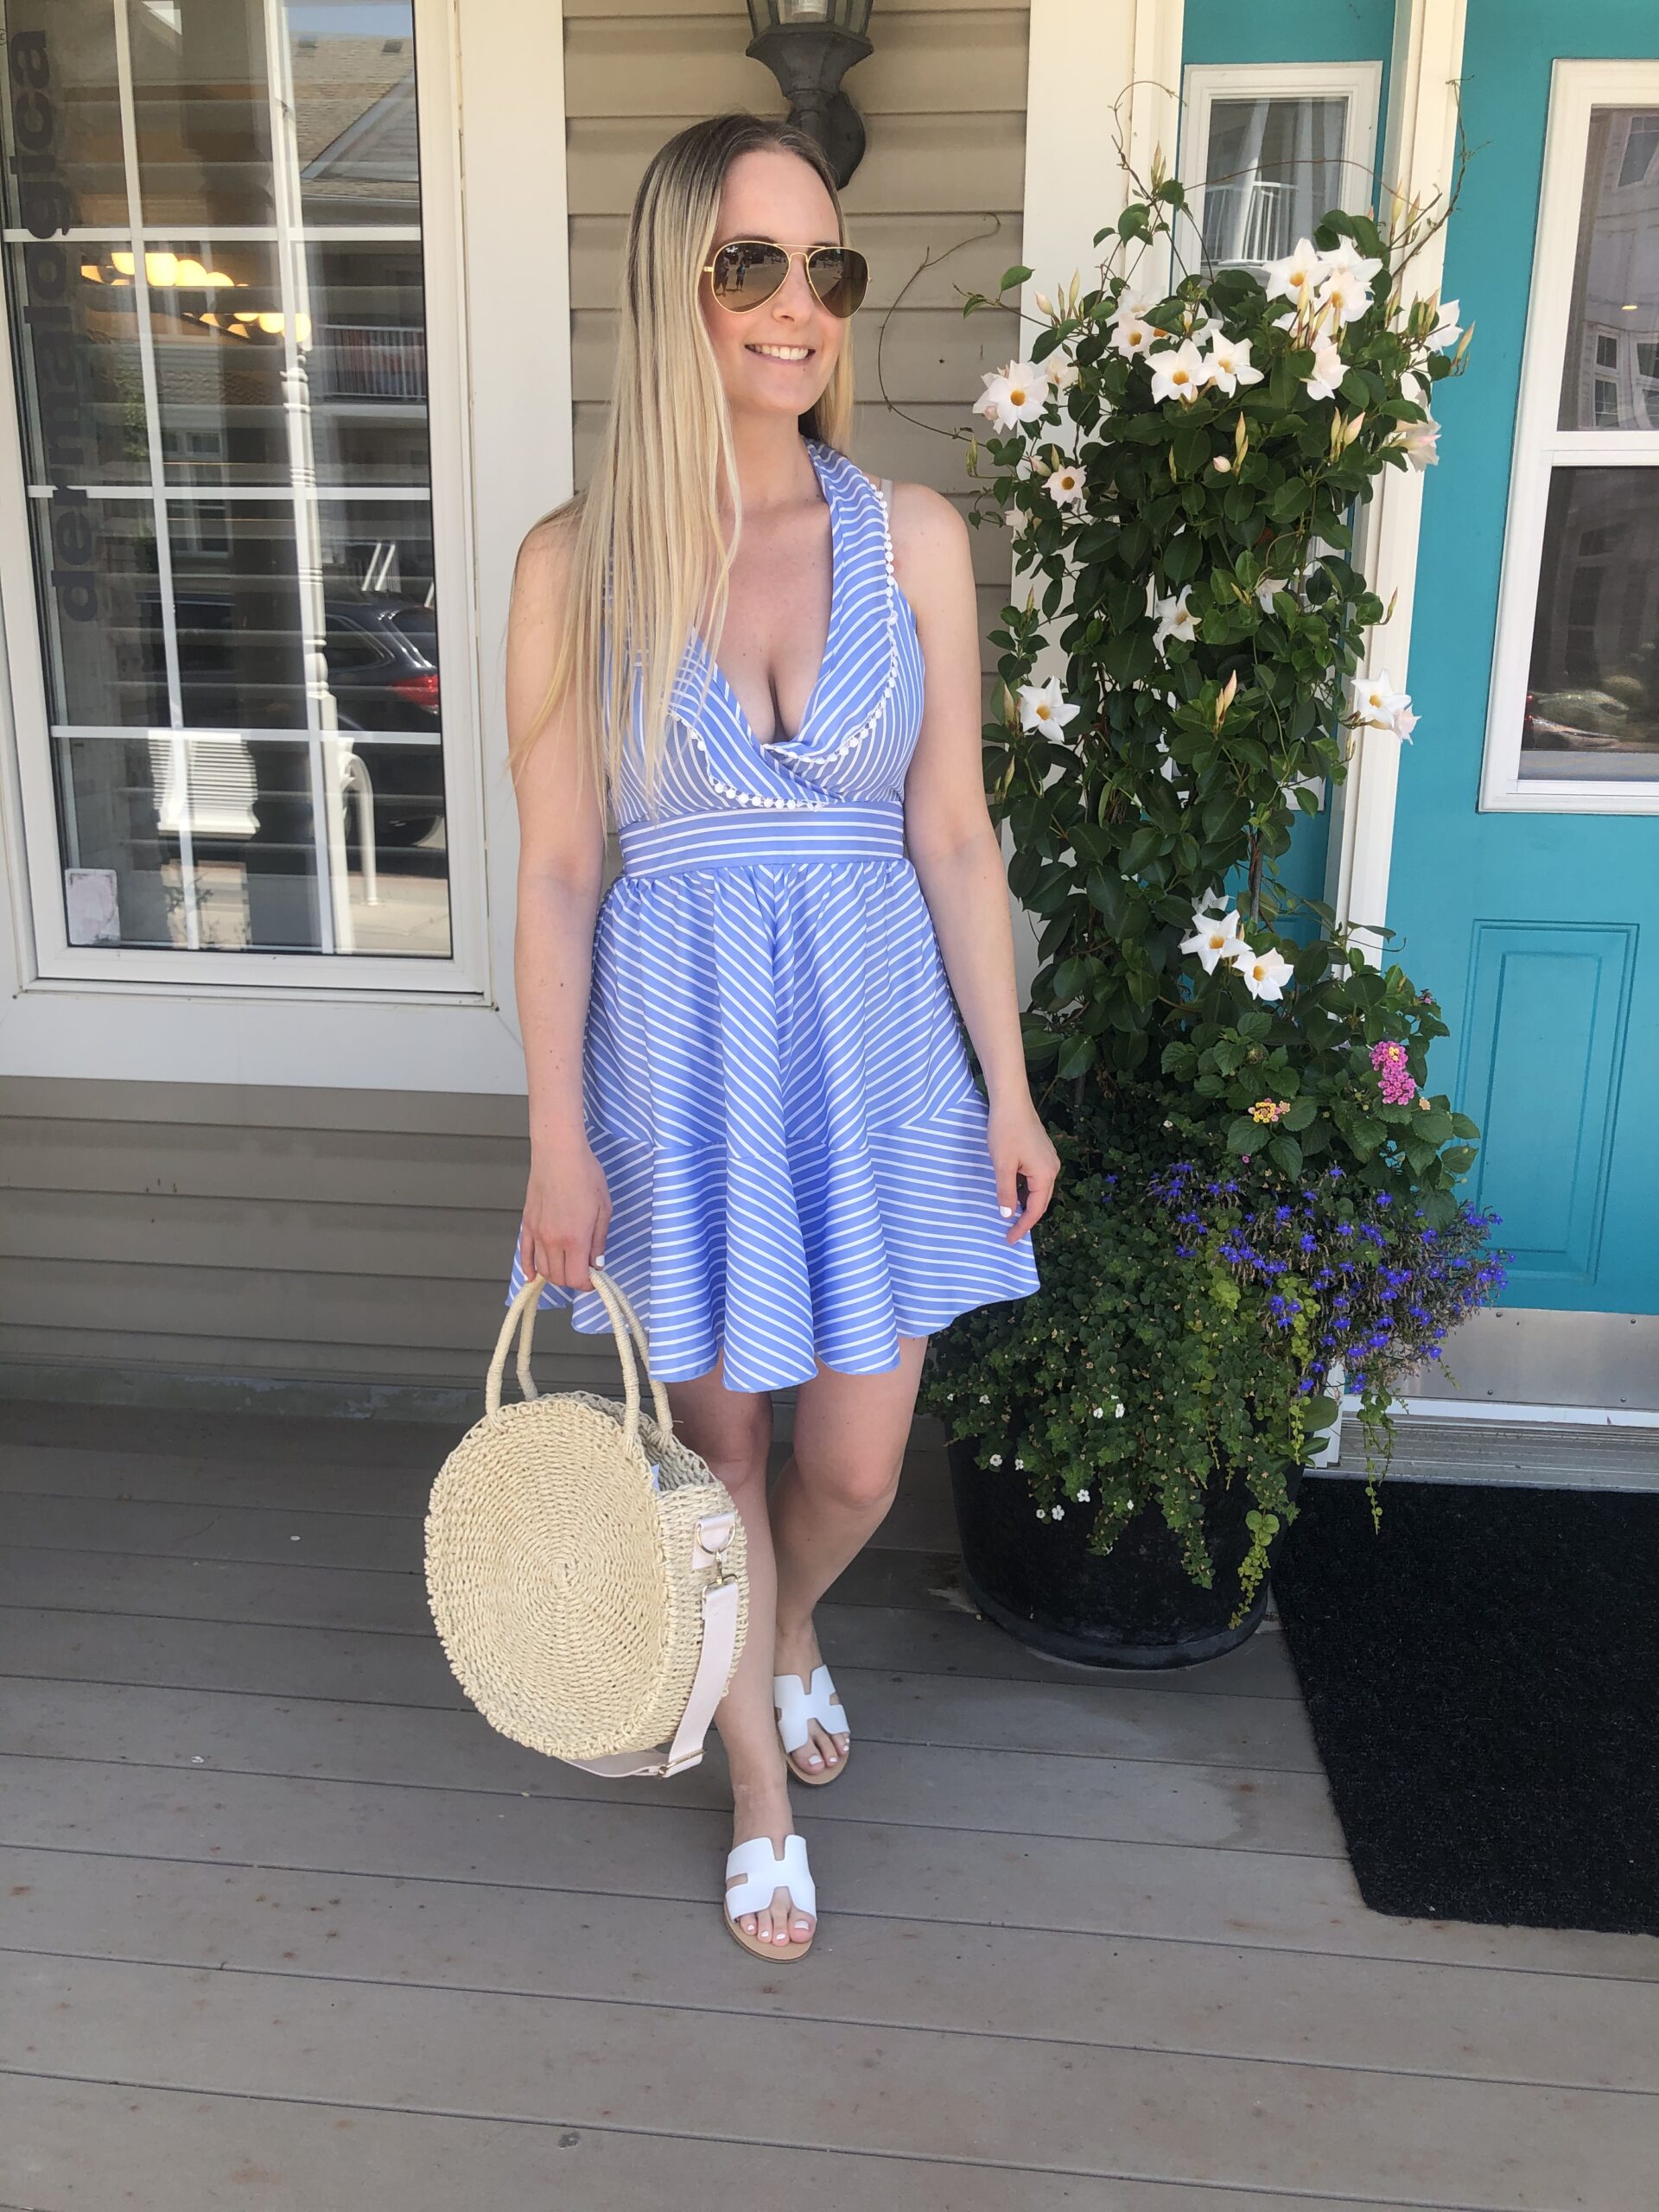 Shein Blue and white ruffle dress on livin' life with style